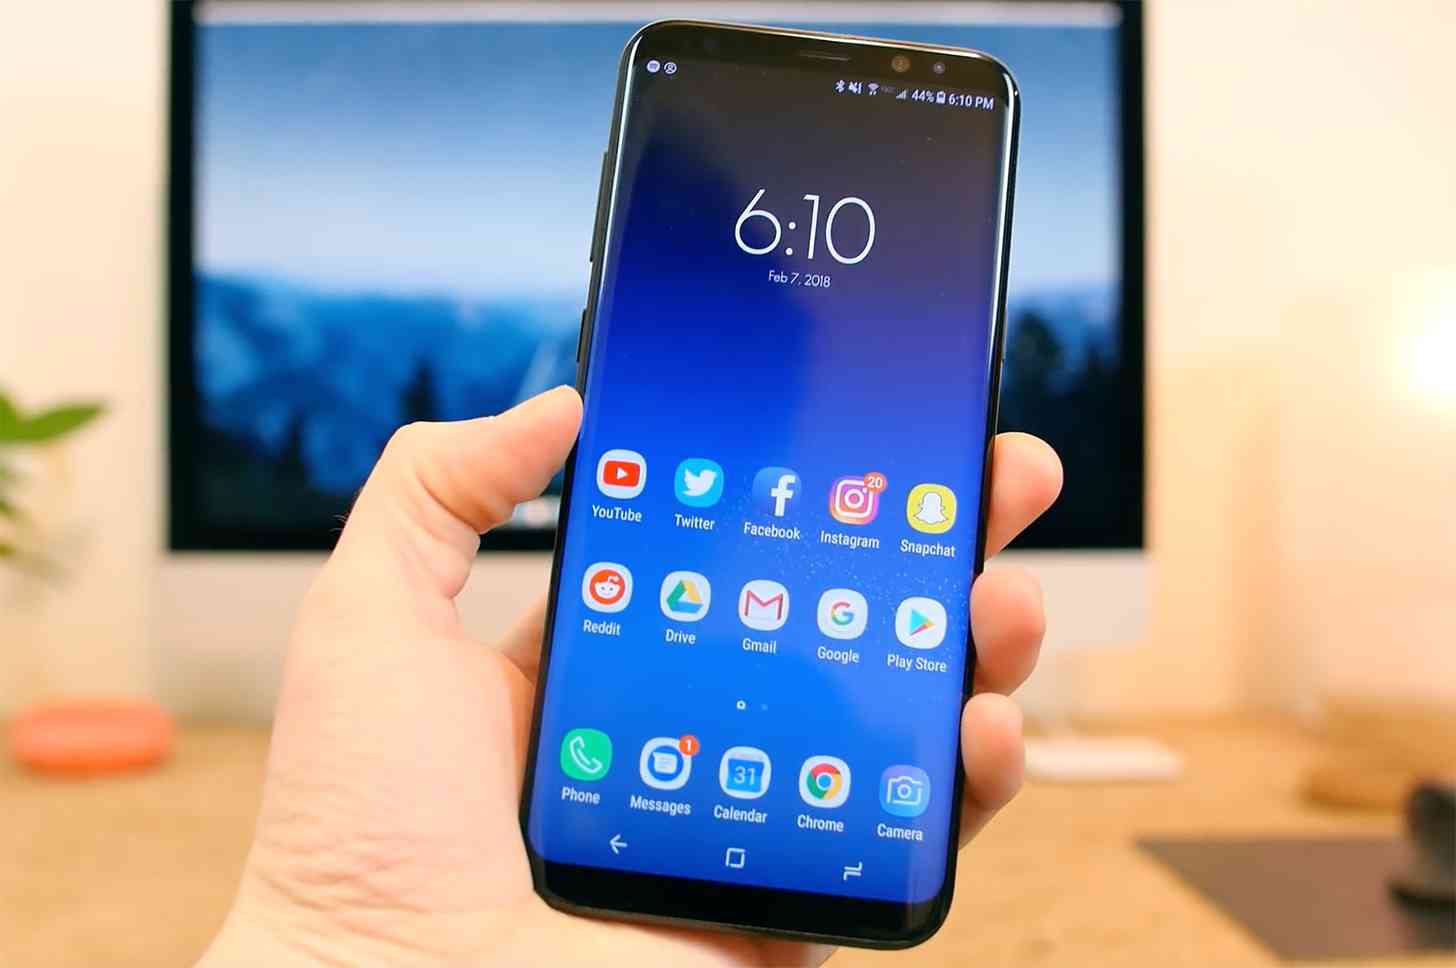 Samsung Galaxy S8 hands-on video review